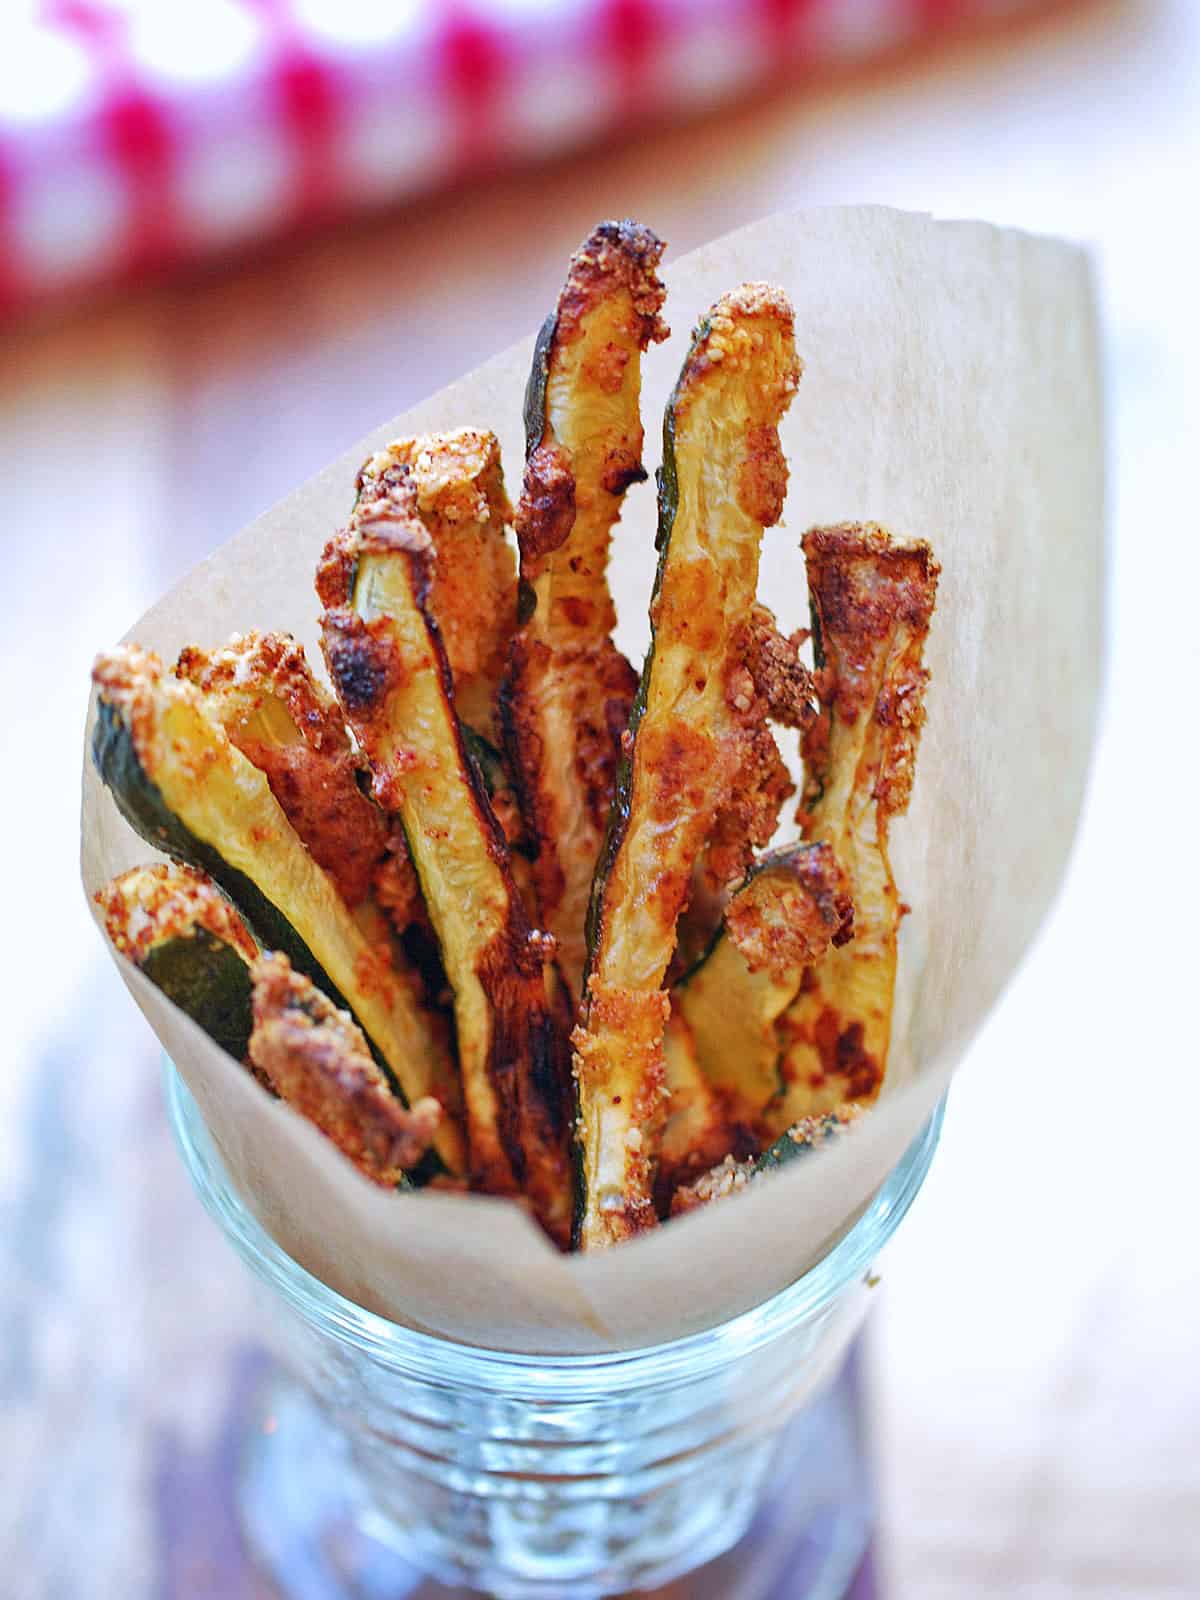 Zucchini fries are served bistro-style.